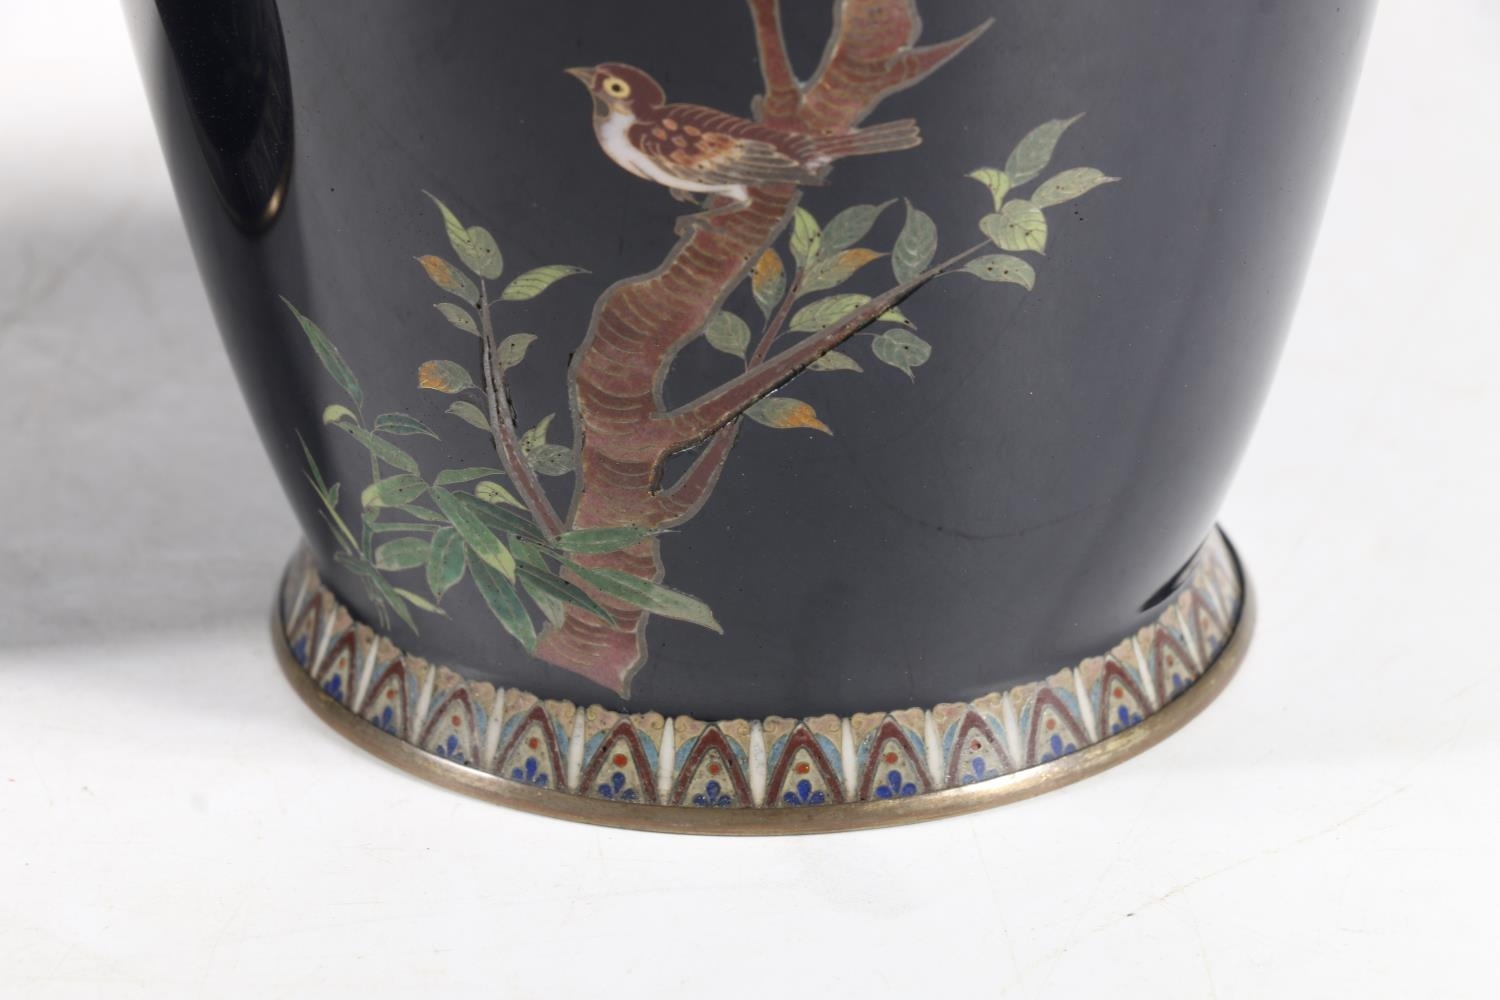 Pair of Japanese cloisonne enamel vases, late Meiji period, decorated with birds and blossom - Image 3 of 6